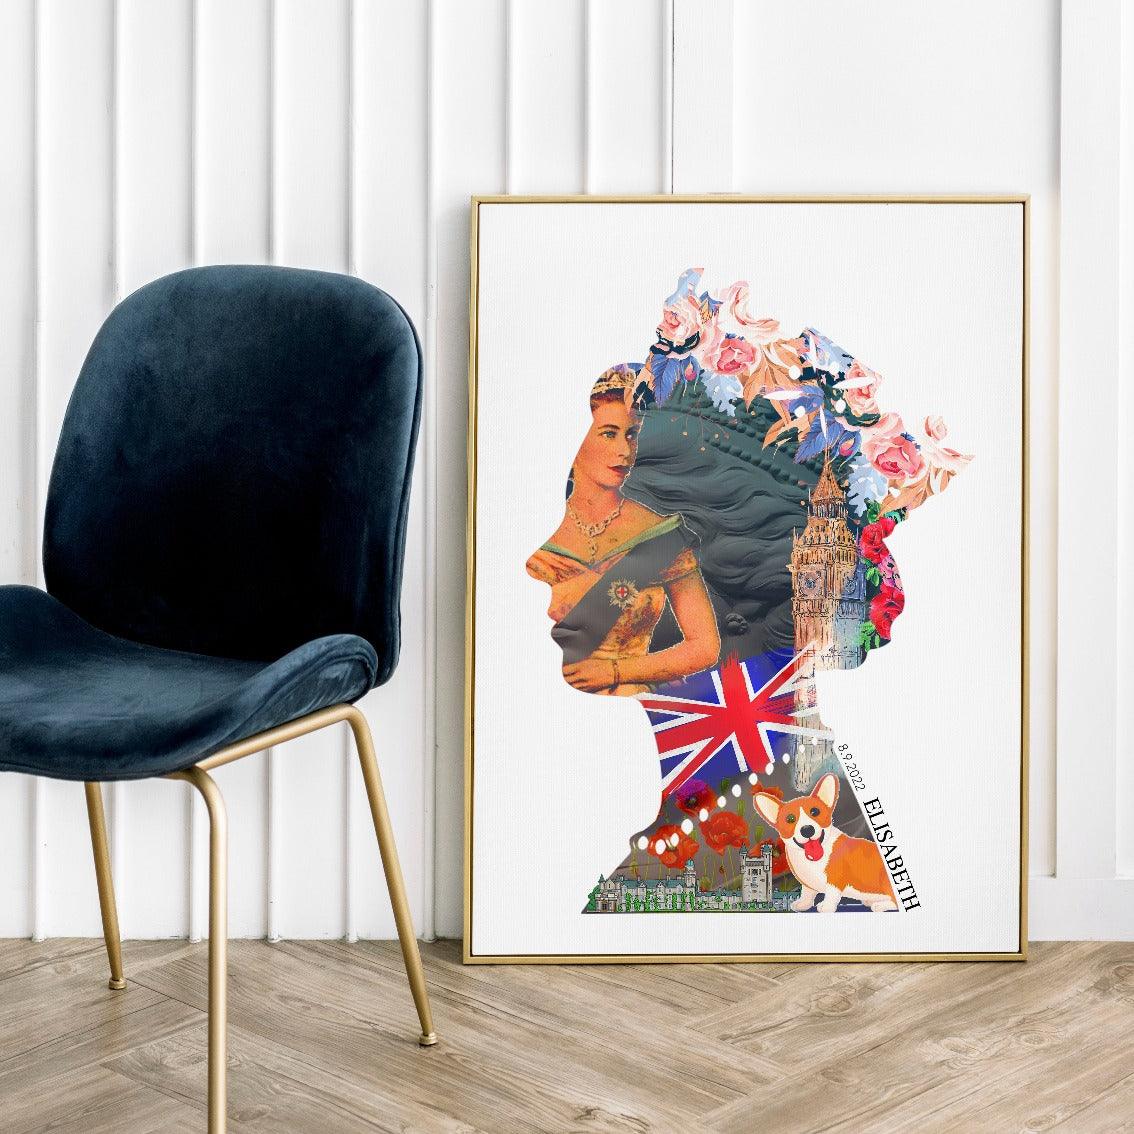 We call it royalty, but you can also call it queen Elizabeth. She's been ruling the UK for over 70 years and is known for her sharp wit, charm, and most importantly, her signature wall art collection. So next time you're buying home decor with a British feel to it, think of QUEEN ELIZABETH WALL ART POSTER first!